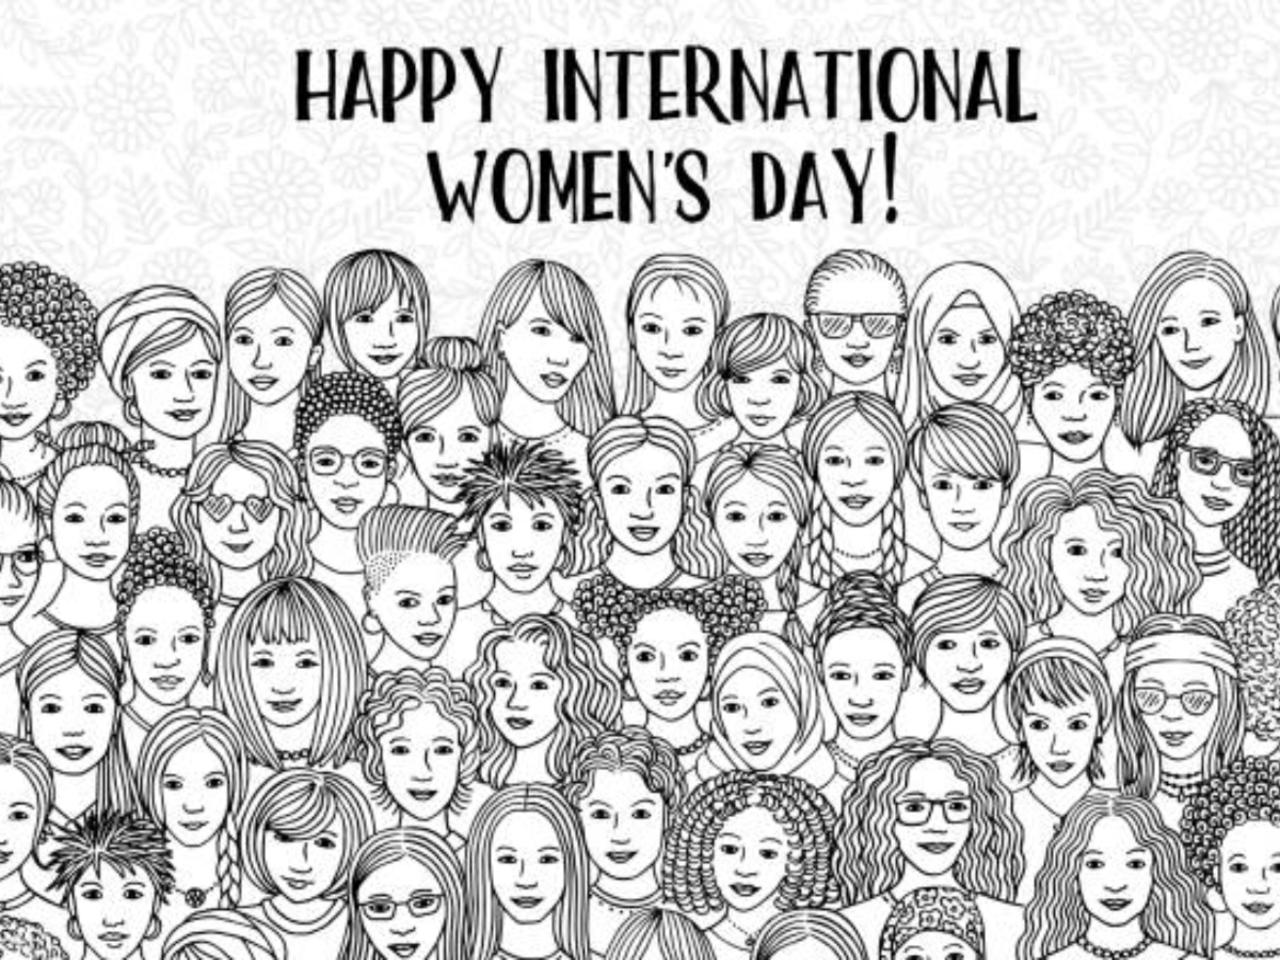 Happy Women's Day 2023: Image, Quotes, Wishes, Messages, Cards, Greetings, Picture and GIFs of India